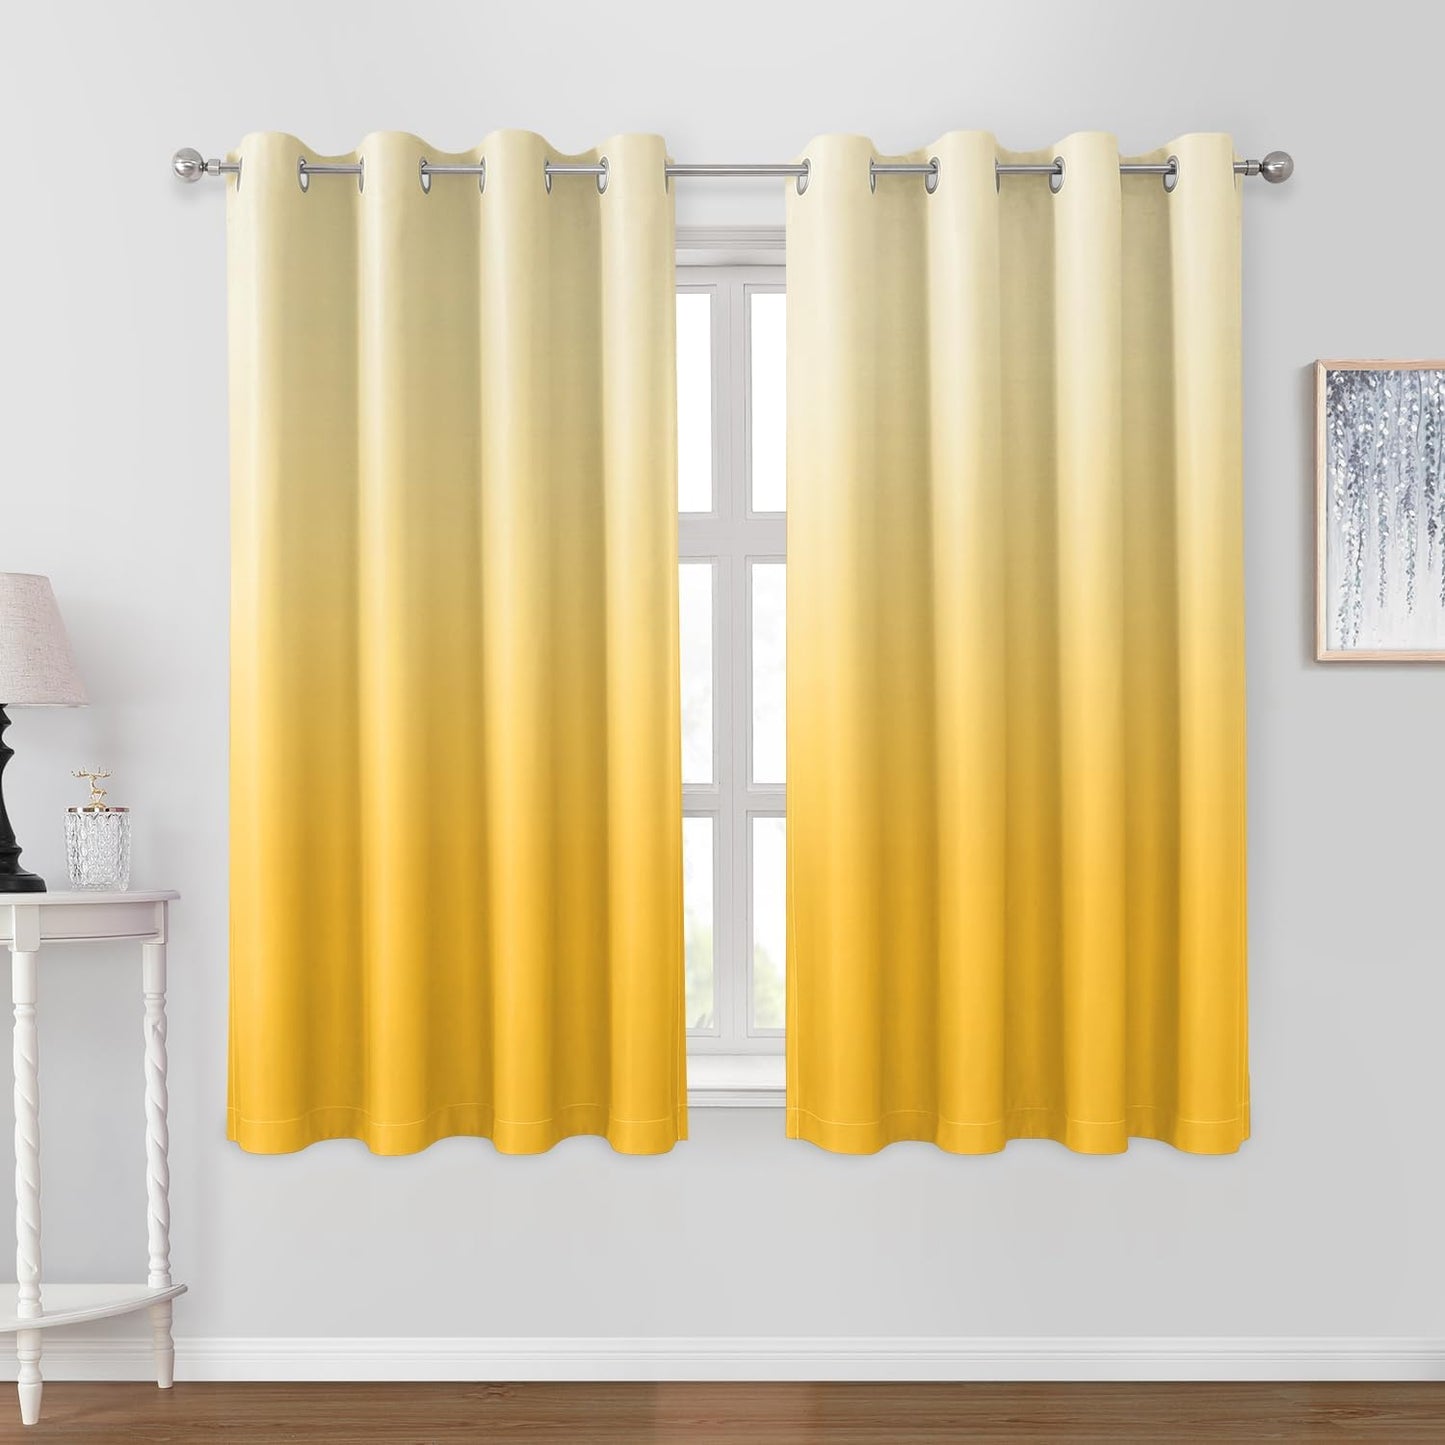 HOMEIDEAS Navy Blue Ombre Blackout Curtains 52 X 84 Inch Length Gradient Room Darkening Thermal Insulated Energy Saving Grommet 2 Panels Window Drapes for Living Room/Bedroom  HOMEIDEAS Yellow 52"W X 63"L 